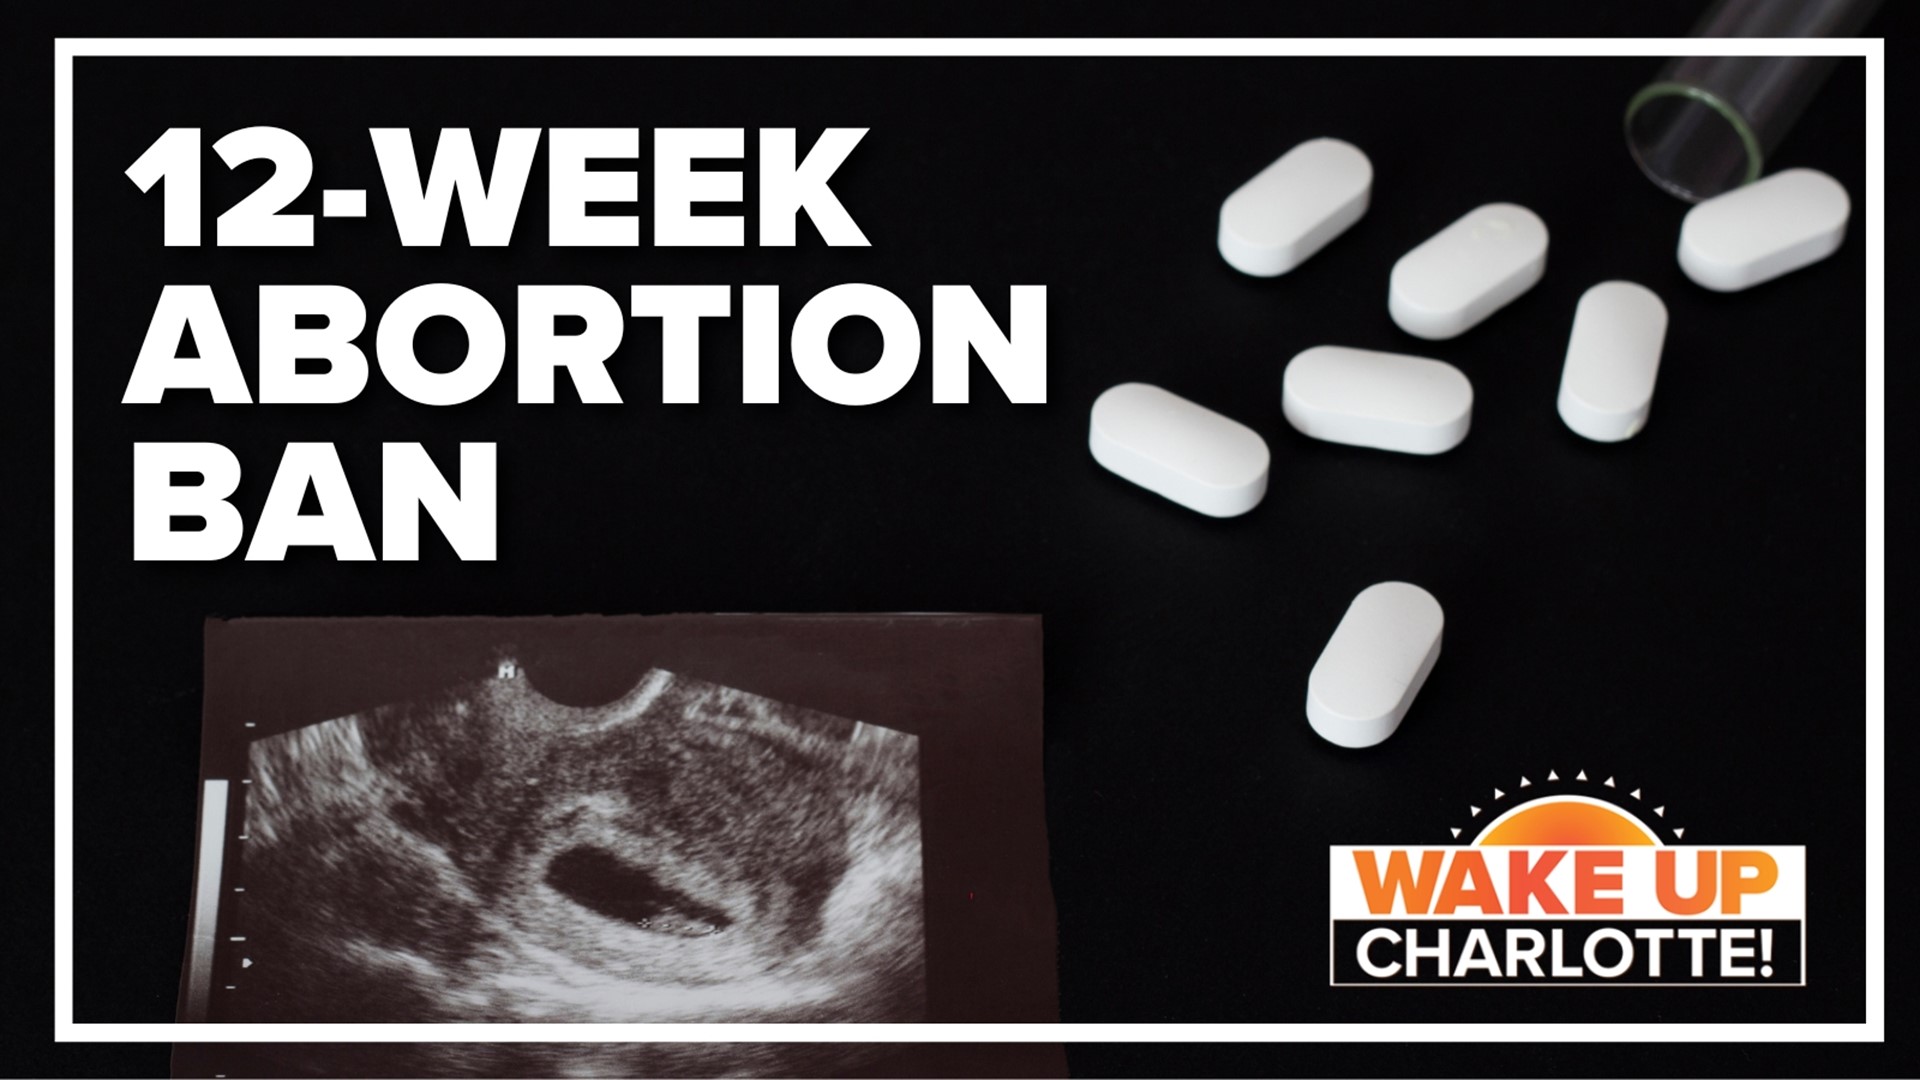 The three-fifths majority vote means a 12-week abortion ban is set to become law.